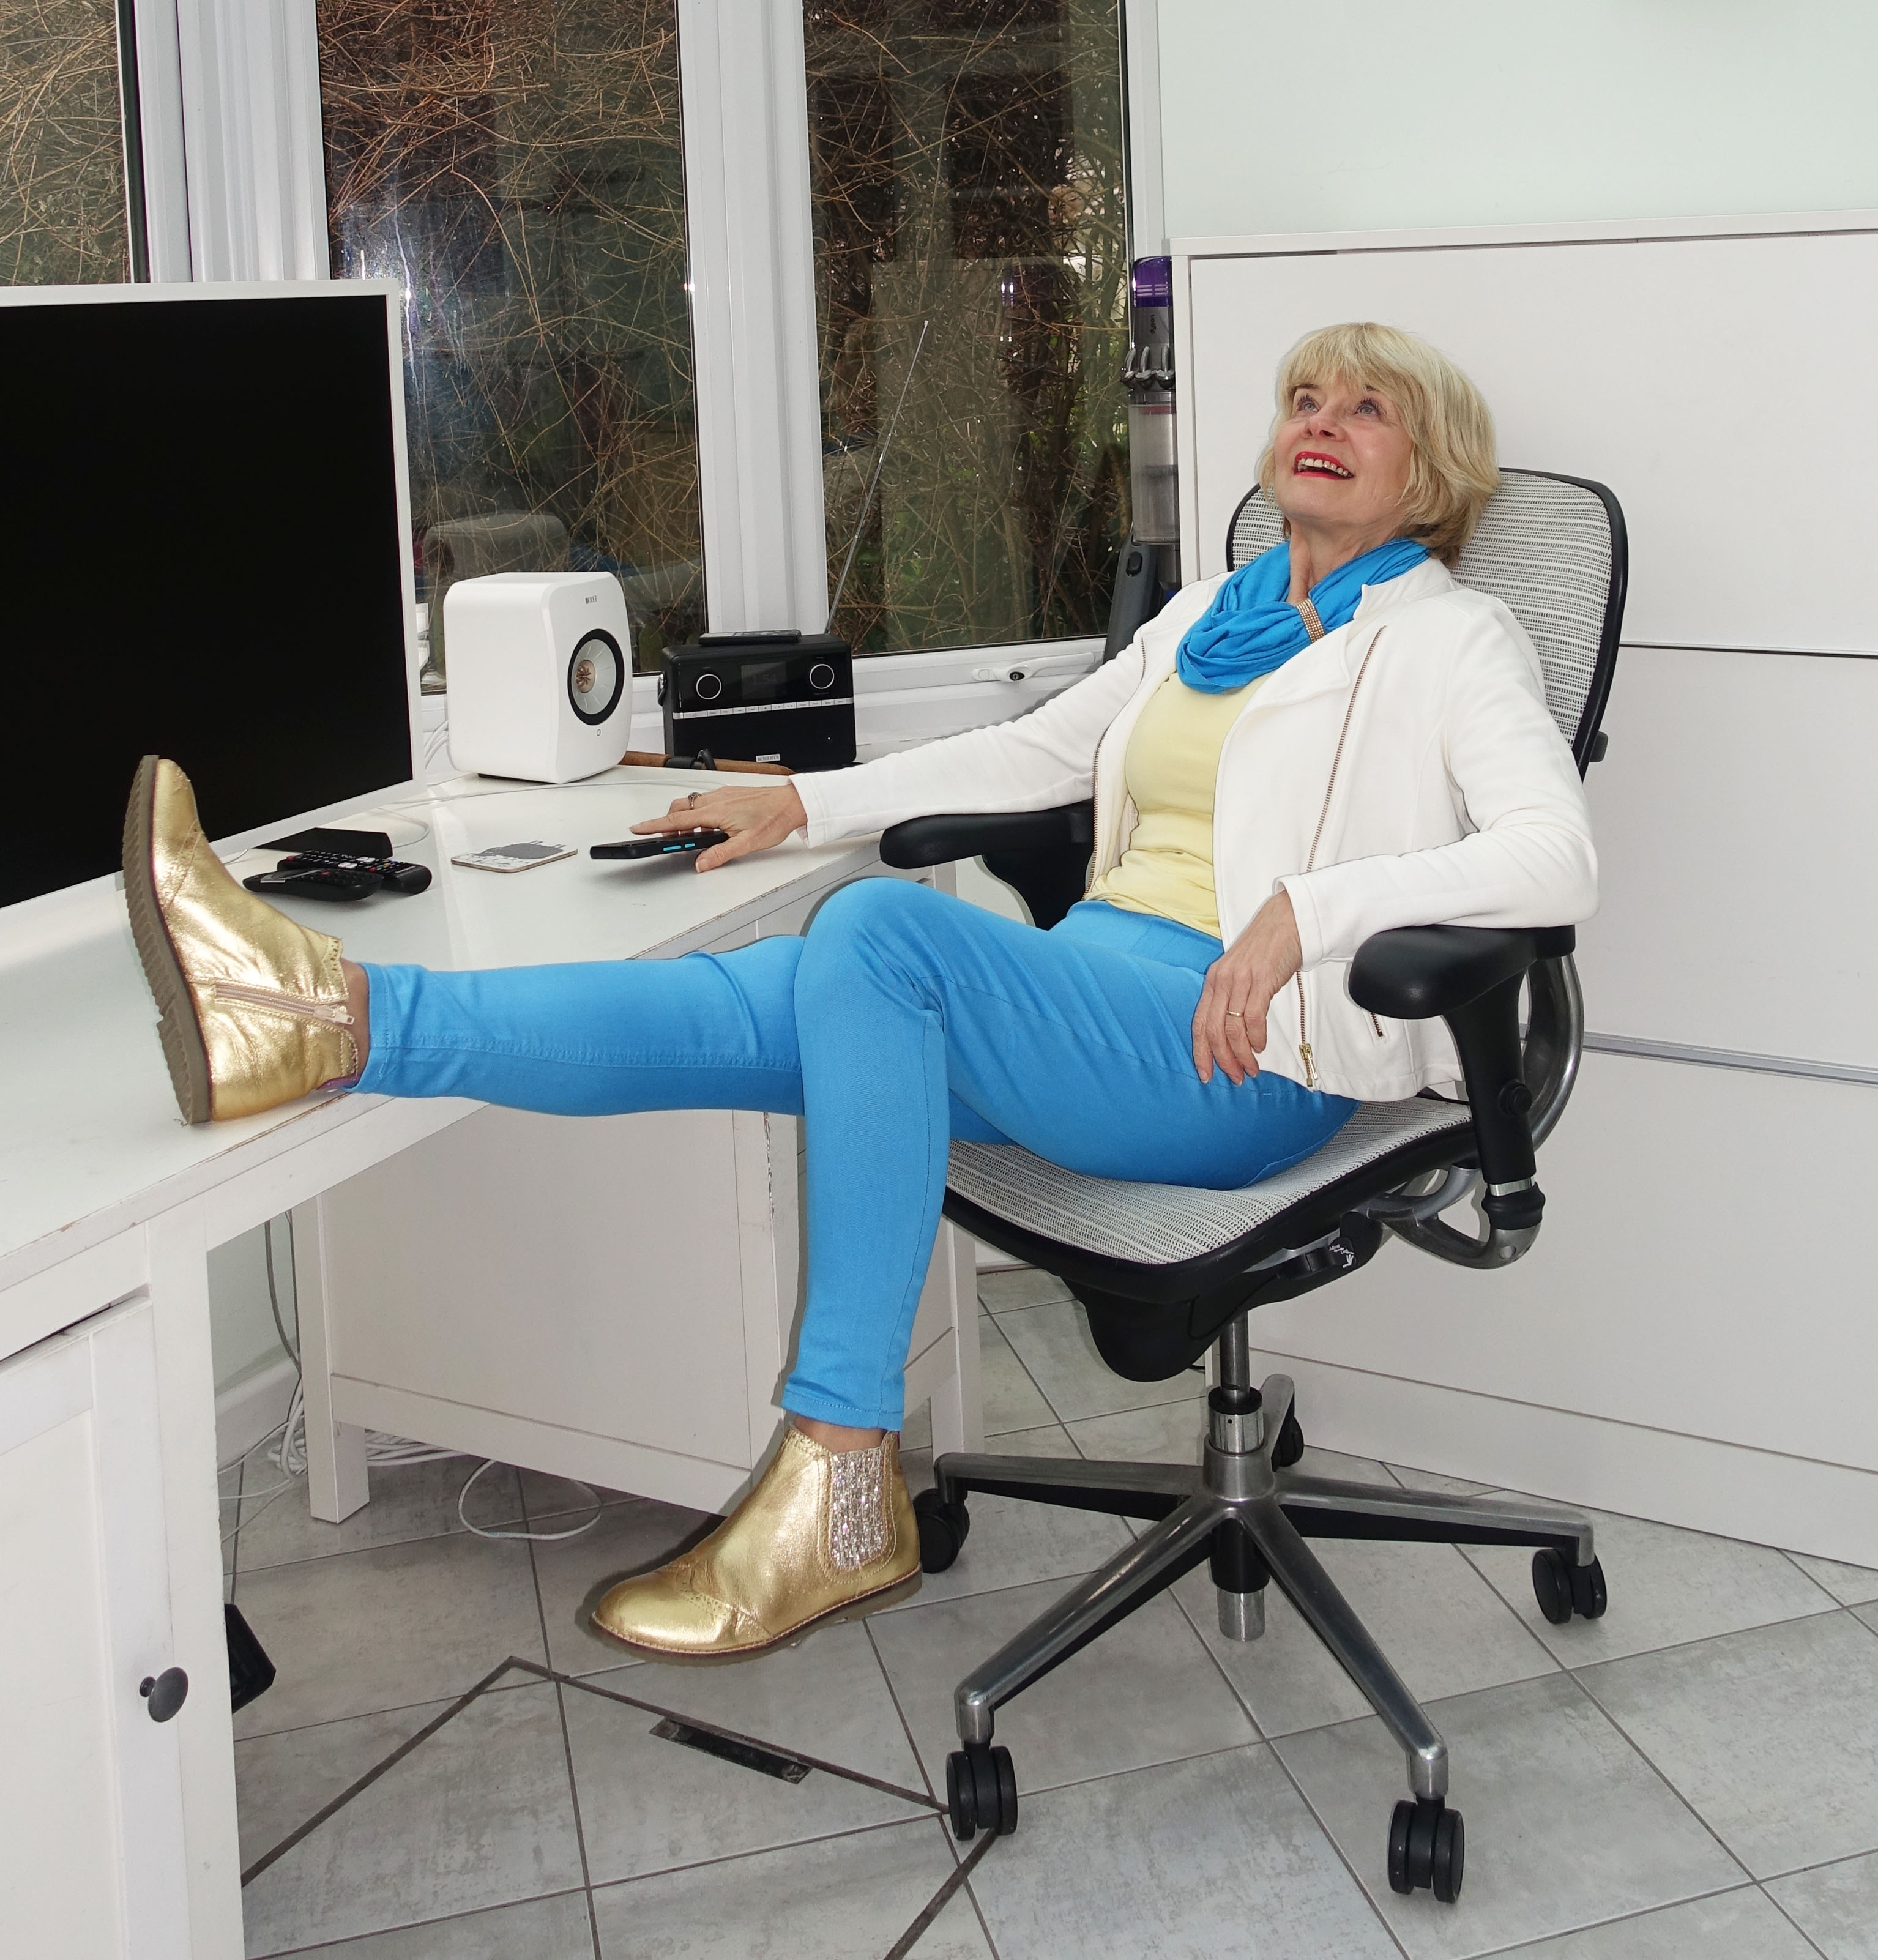 For the latest Style Not Age Challenge Gail Hanlon from Is This Mutton is wearing turquoise jeggings and scarf with yellow and soft white.